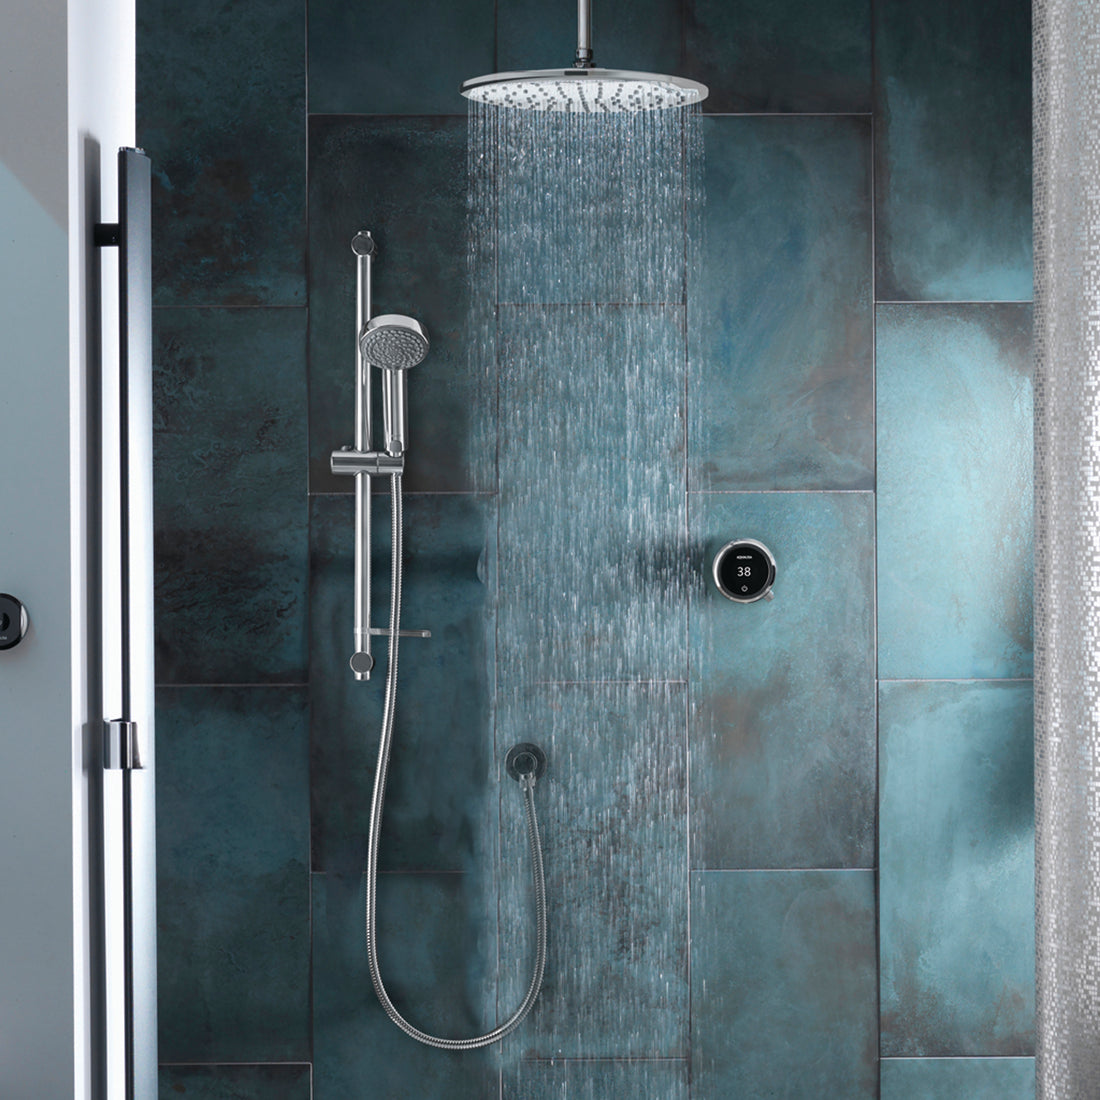 Aqualisa Quartz Touch Smart Shower - Concealed With Adjustable &amp; Fixed Ceiling Head against dark blue wall panels QZST.A1.BV.DVFC.20